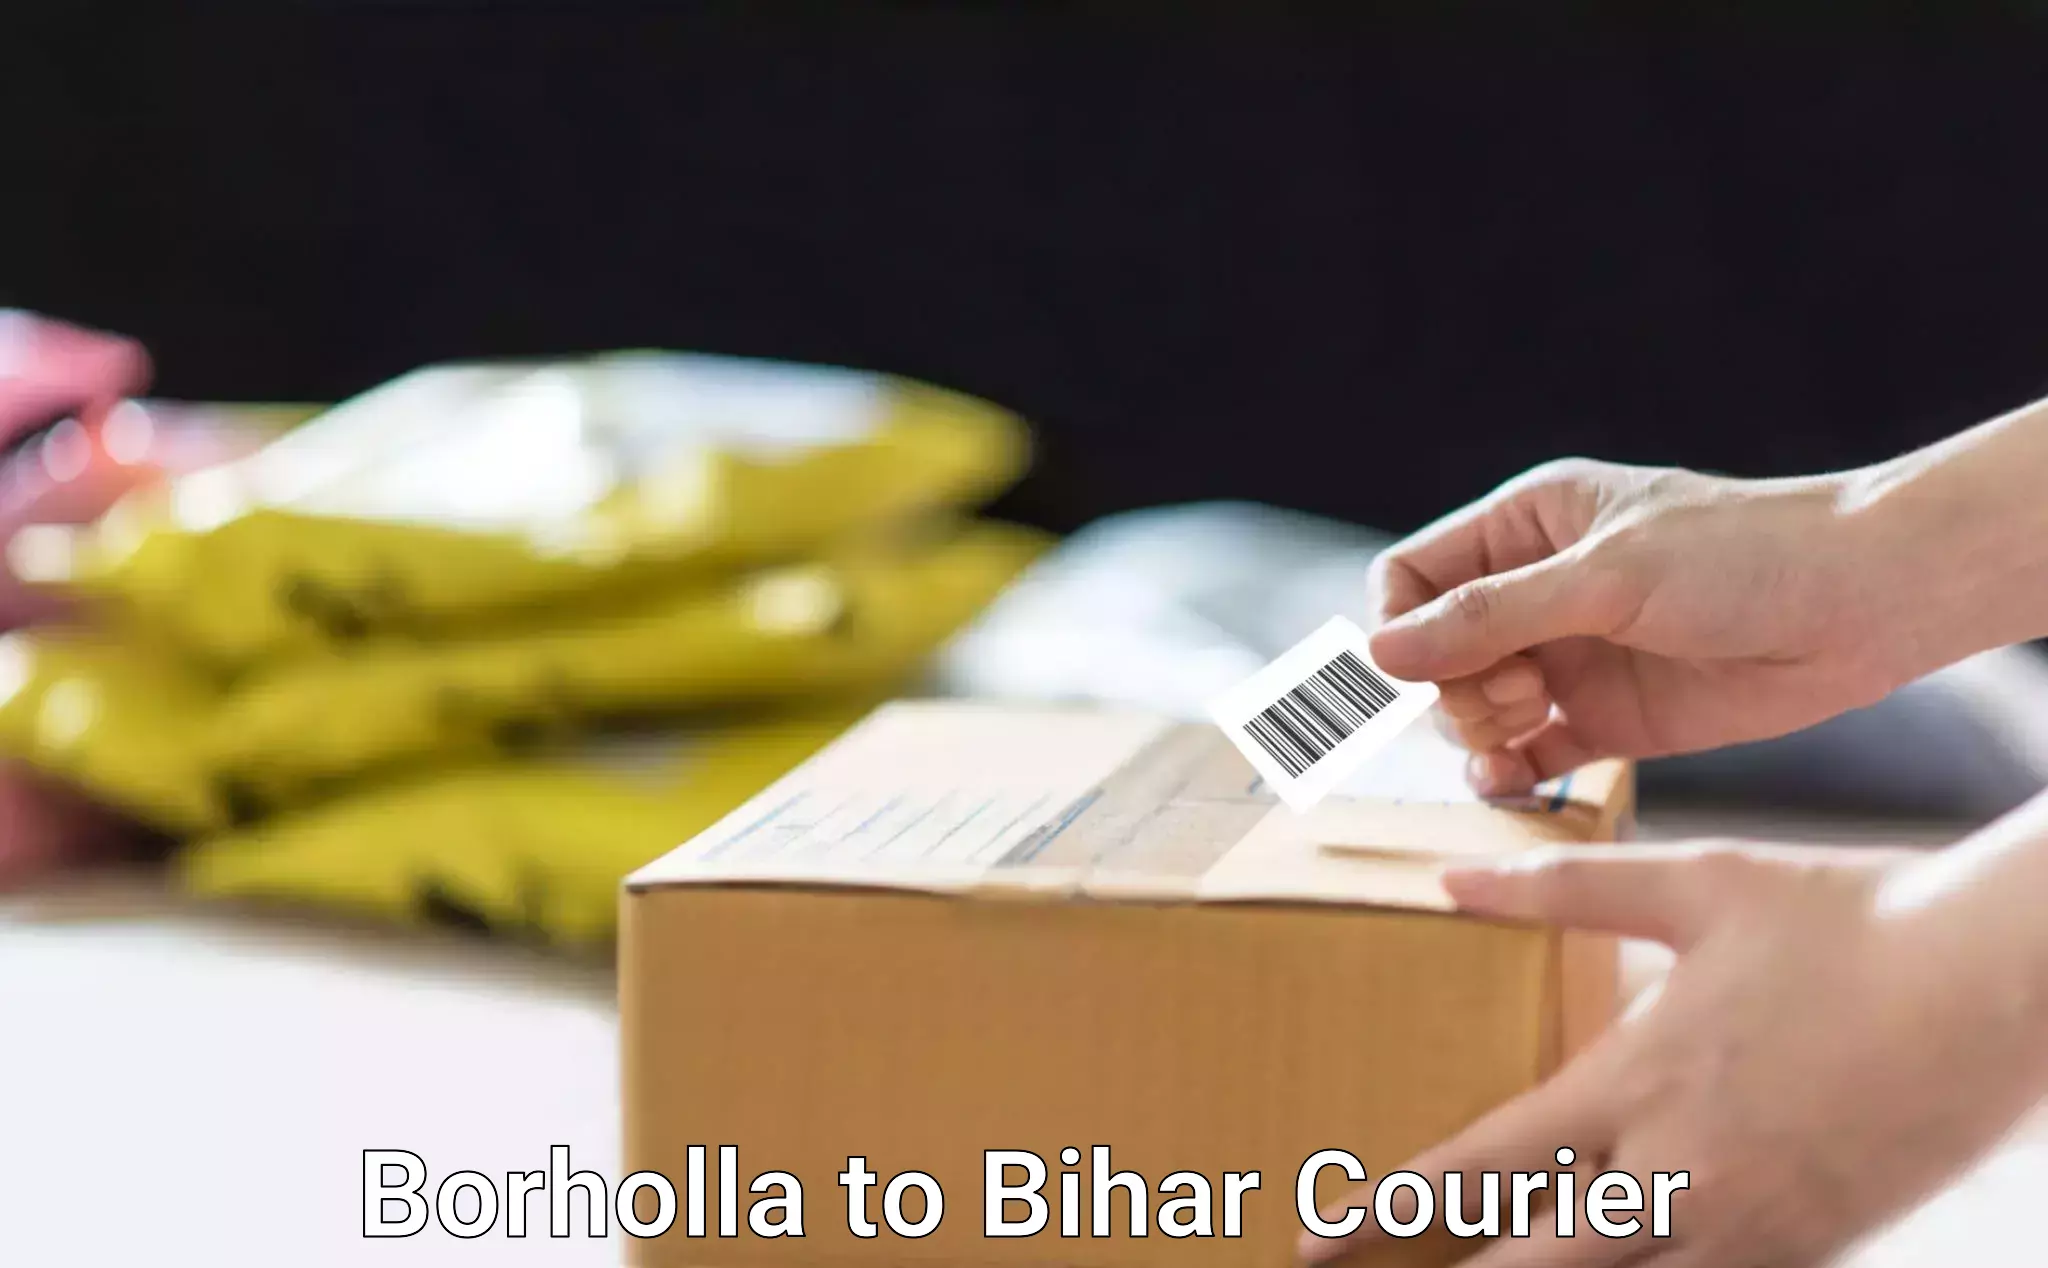 State-of-the-art courier technology Borholla to Biraul